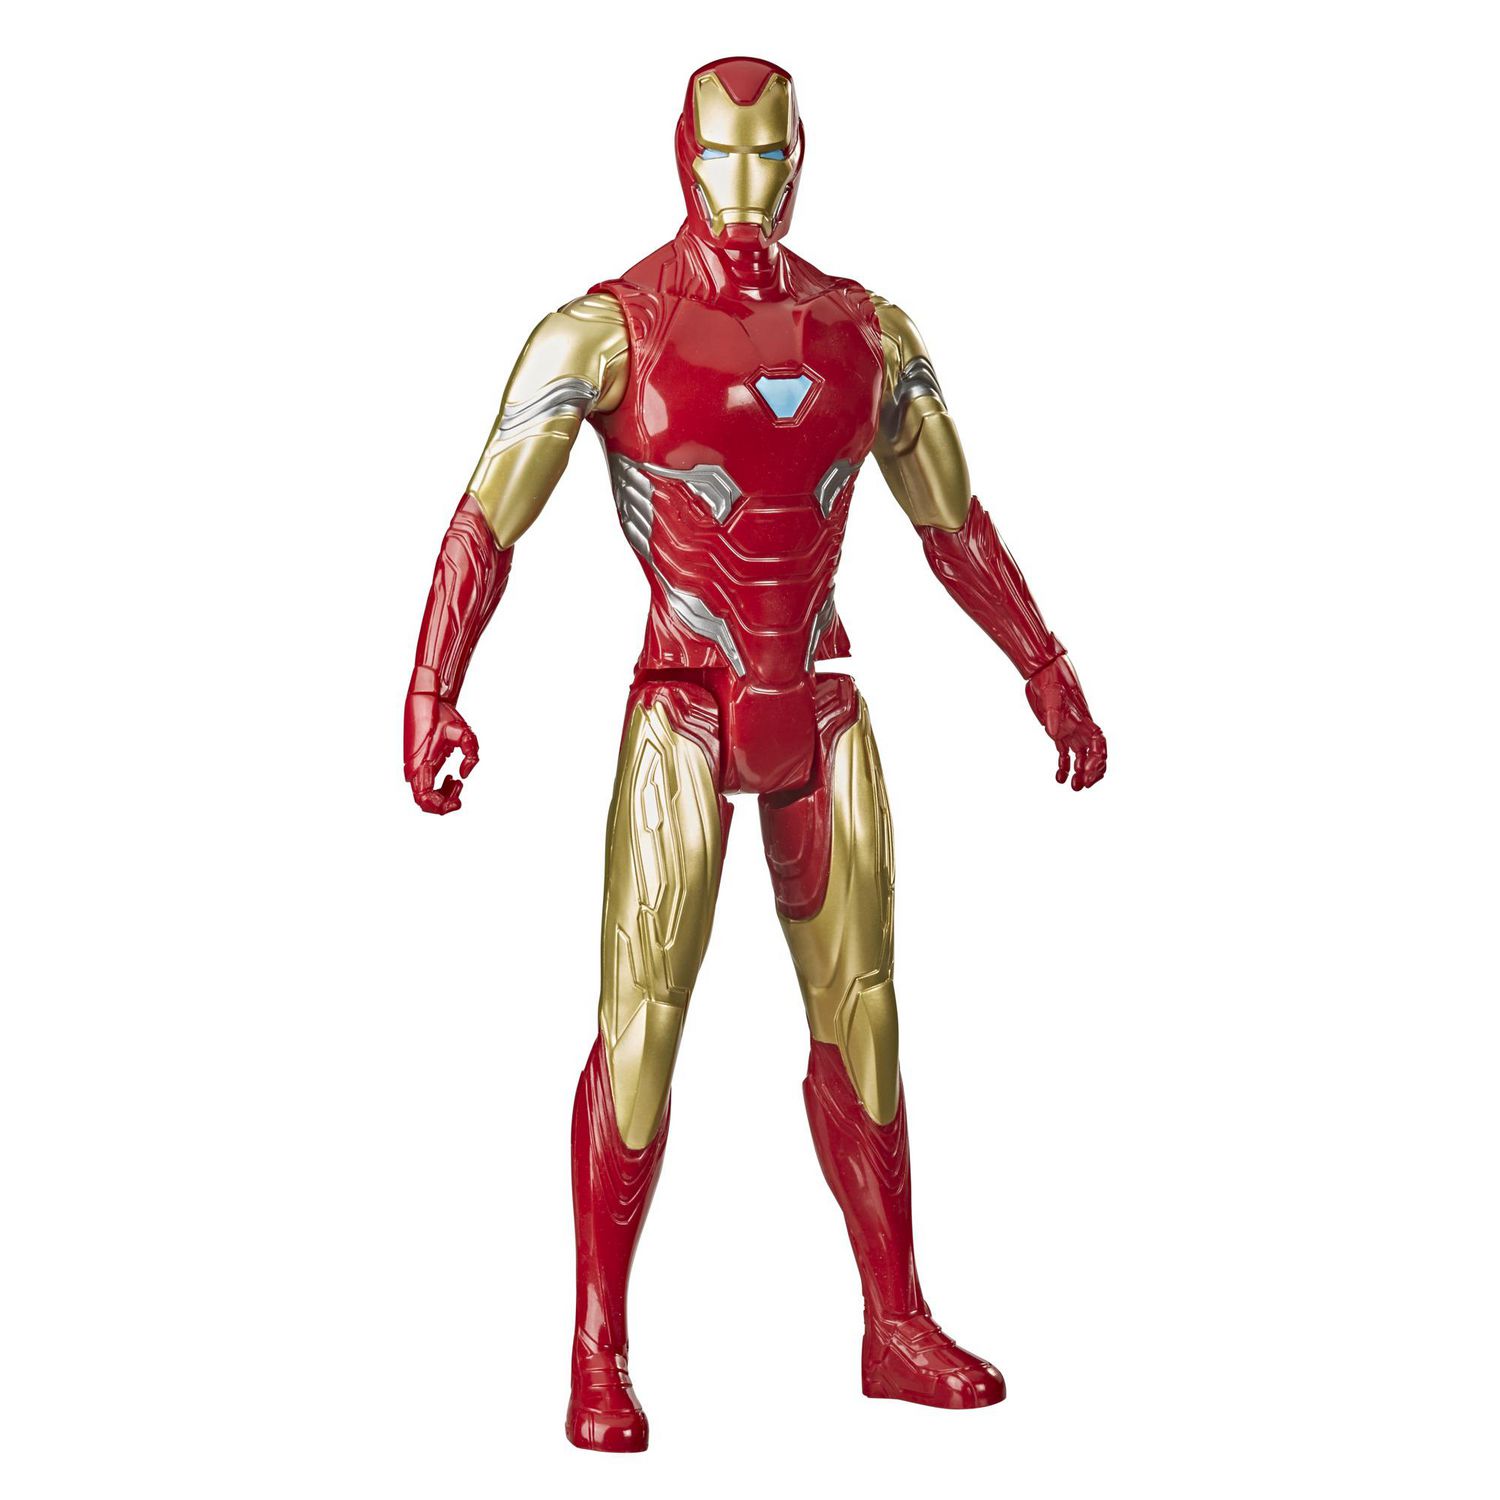 Marvel Avengers Titan Hero Series Collectible 12-Inch Iron Man Action  Figure, Toy For Ages 4 and Up, Ages 4 and up 